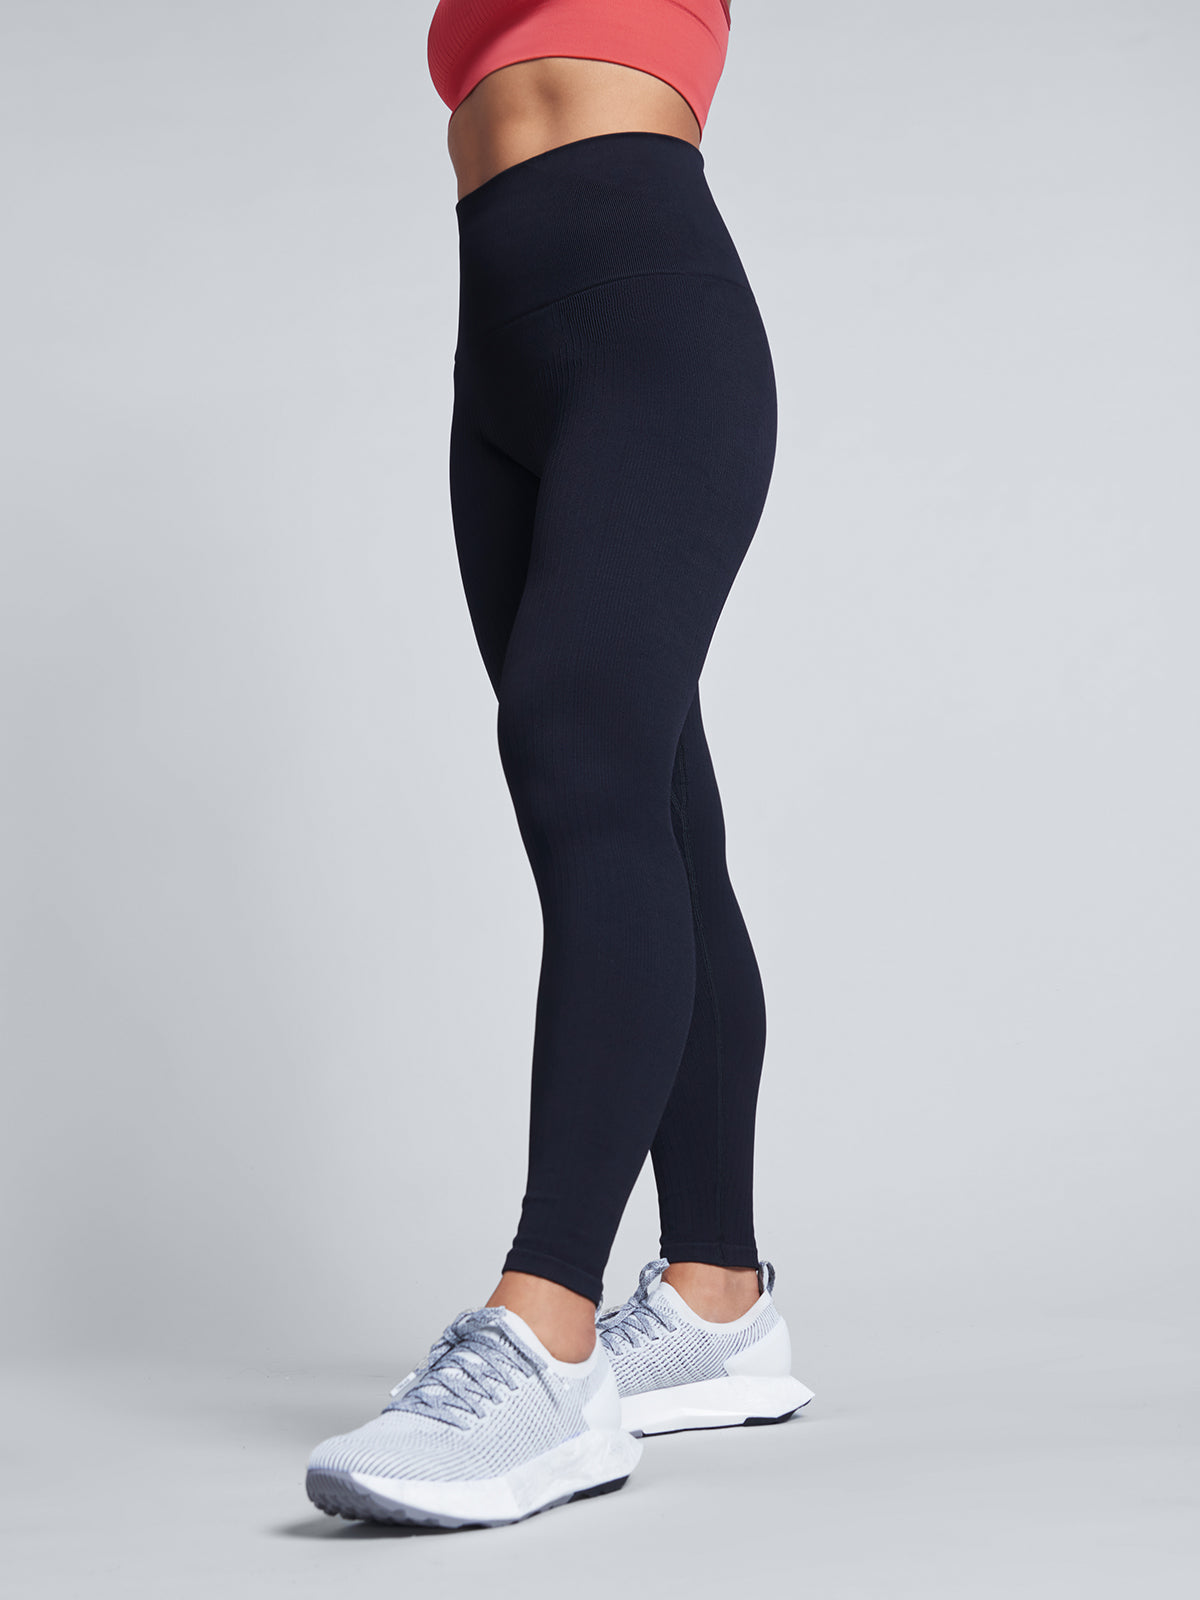 Harvard Seamless Leggings - High-waisted Compression By Maxxim